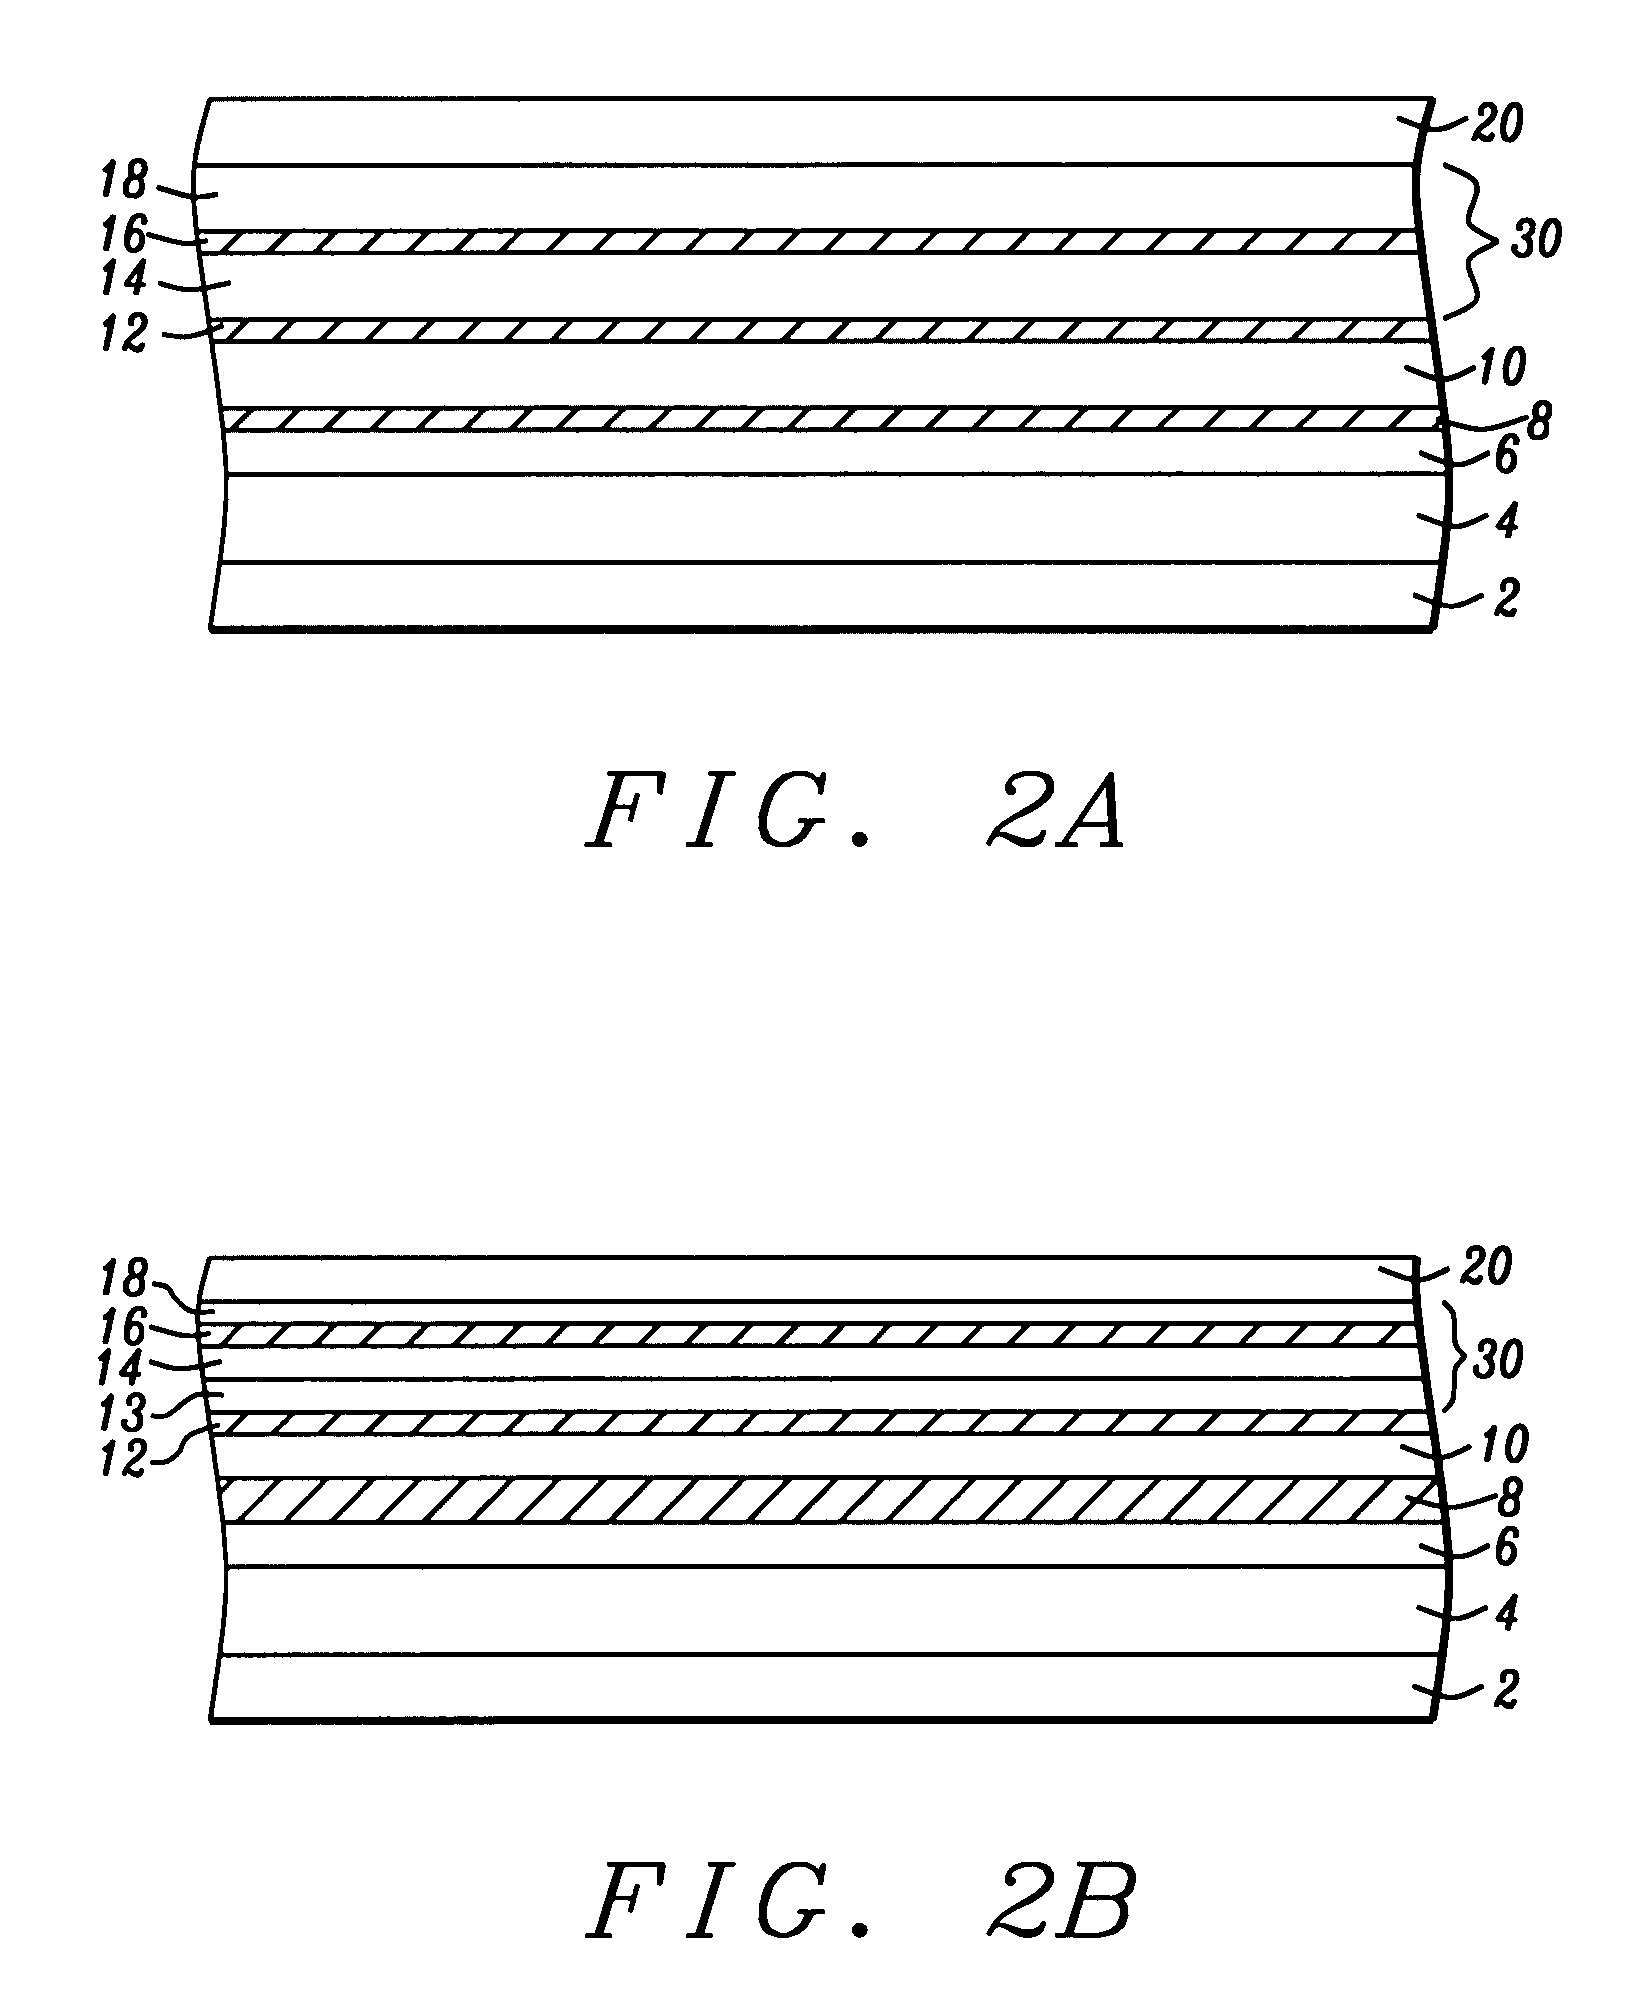 Novel free layer design for TMR/CPP device